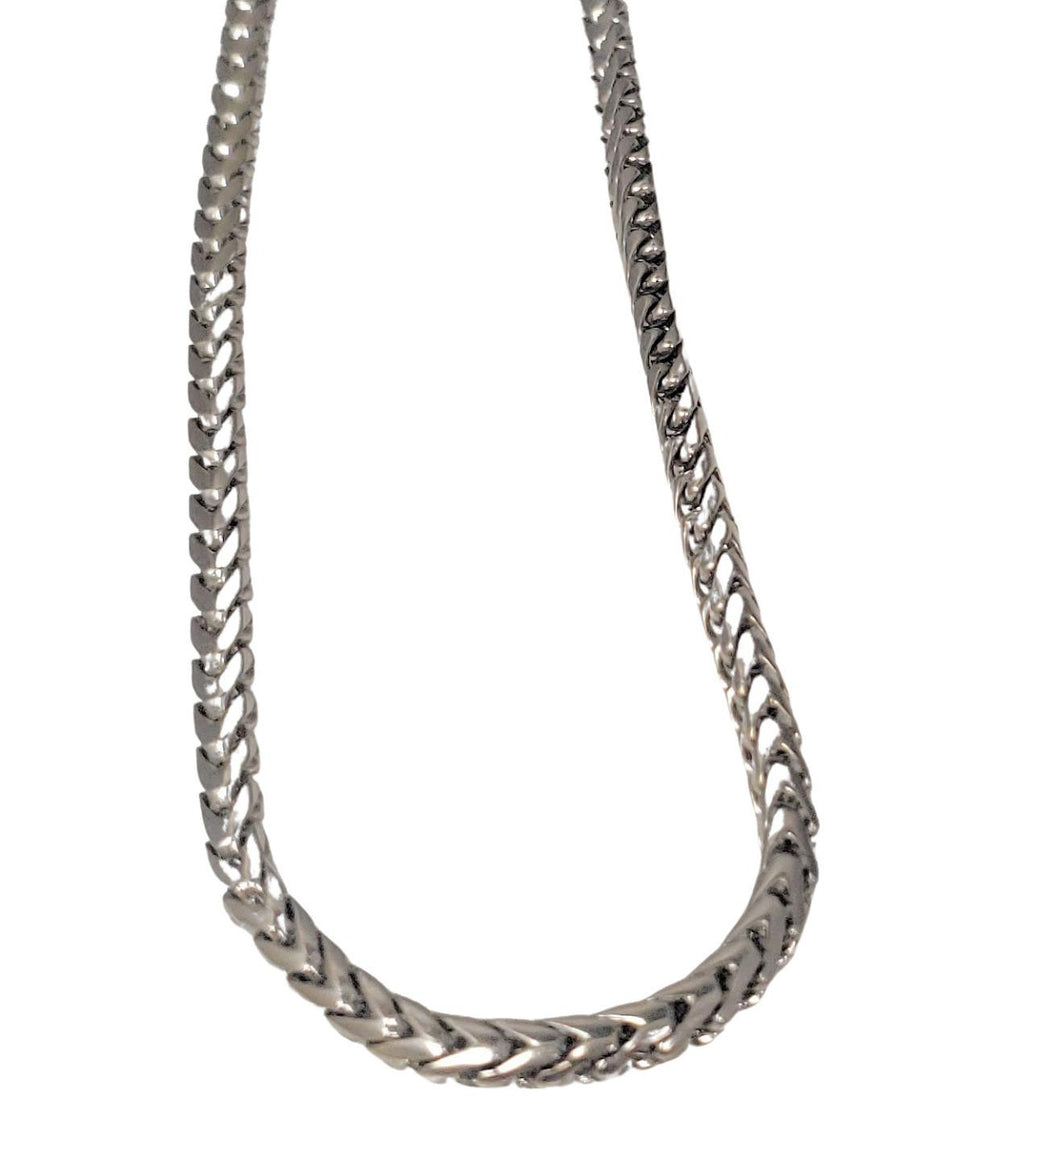 5mm Round Box Franco Necklace Chain in 10k White Gold 30 3/4